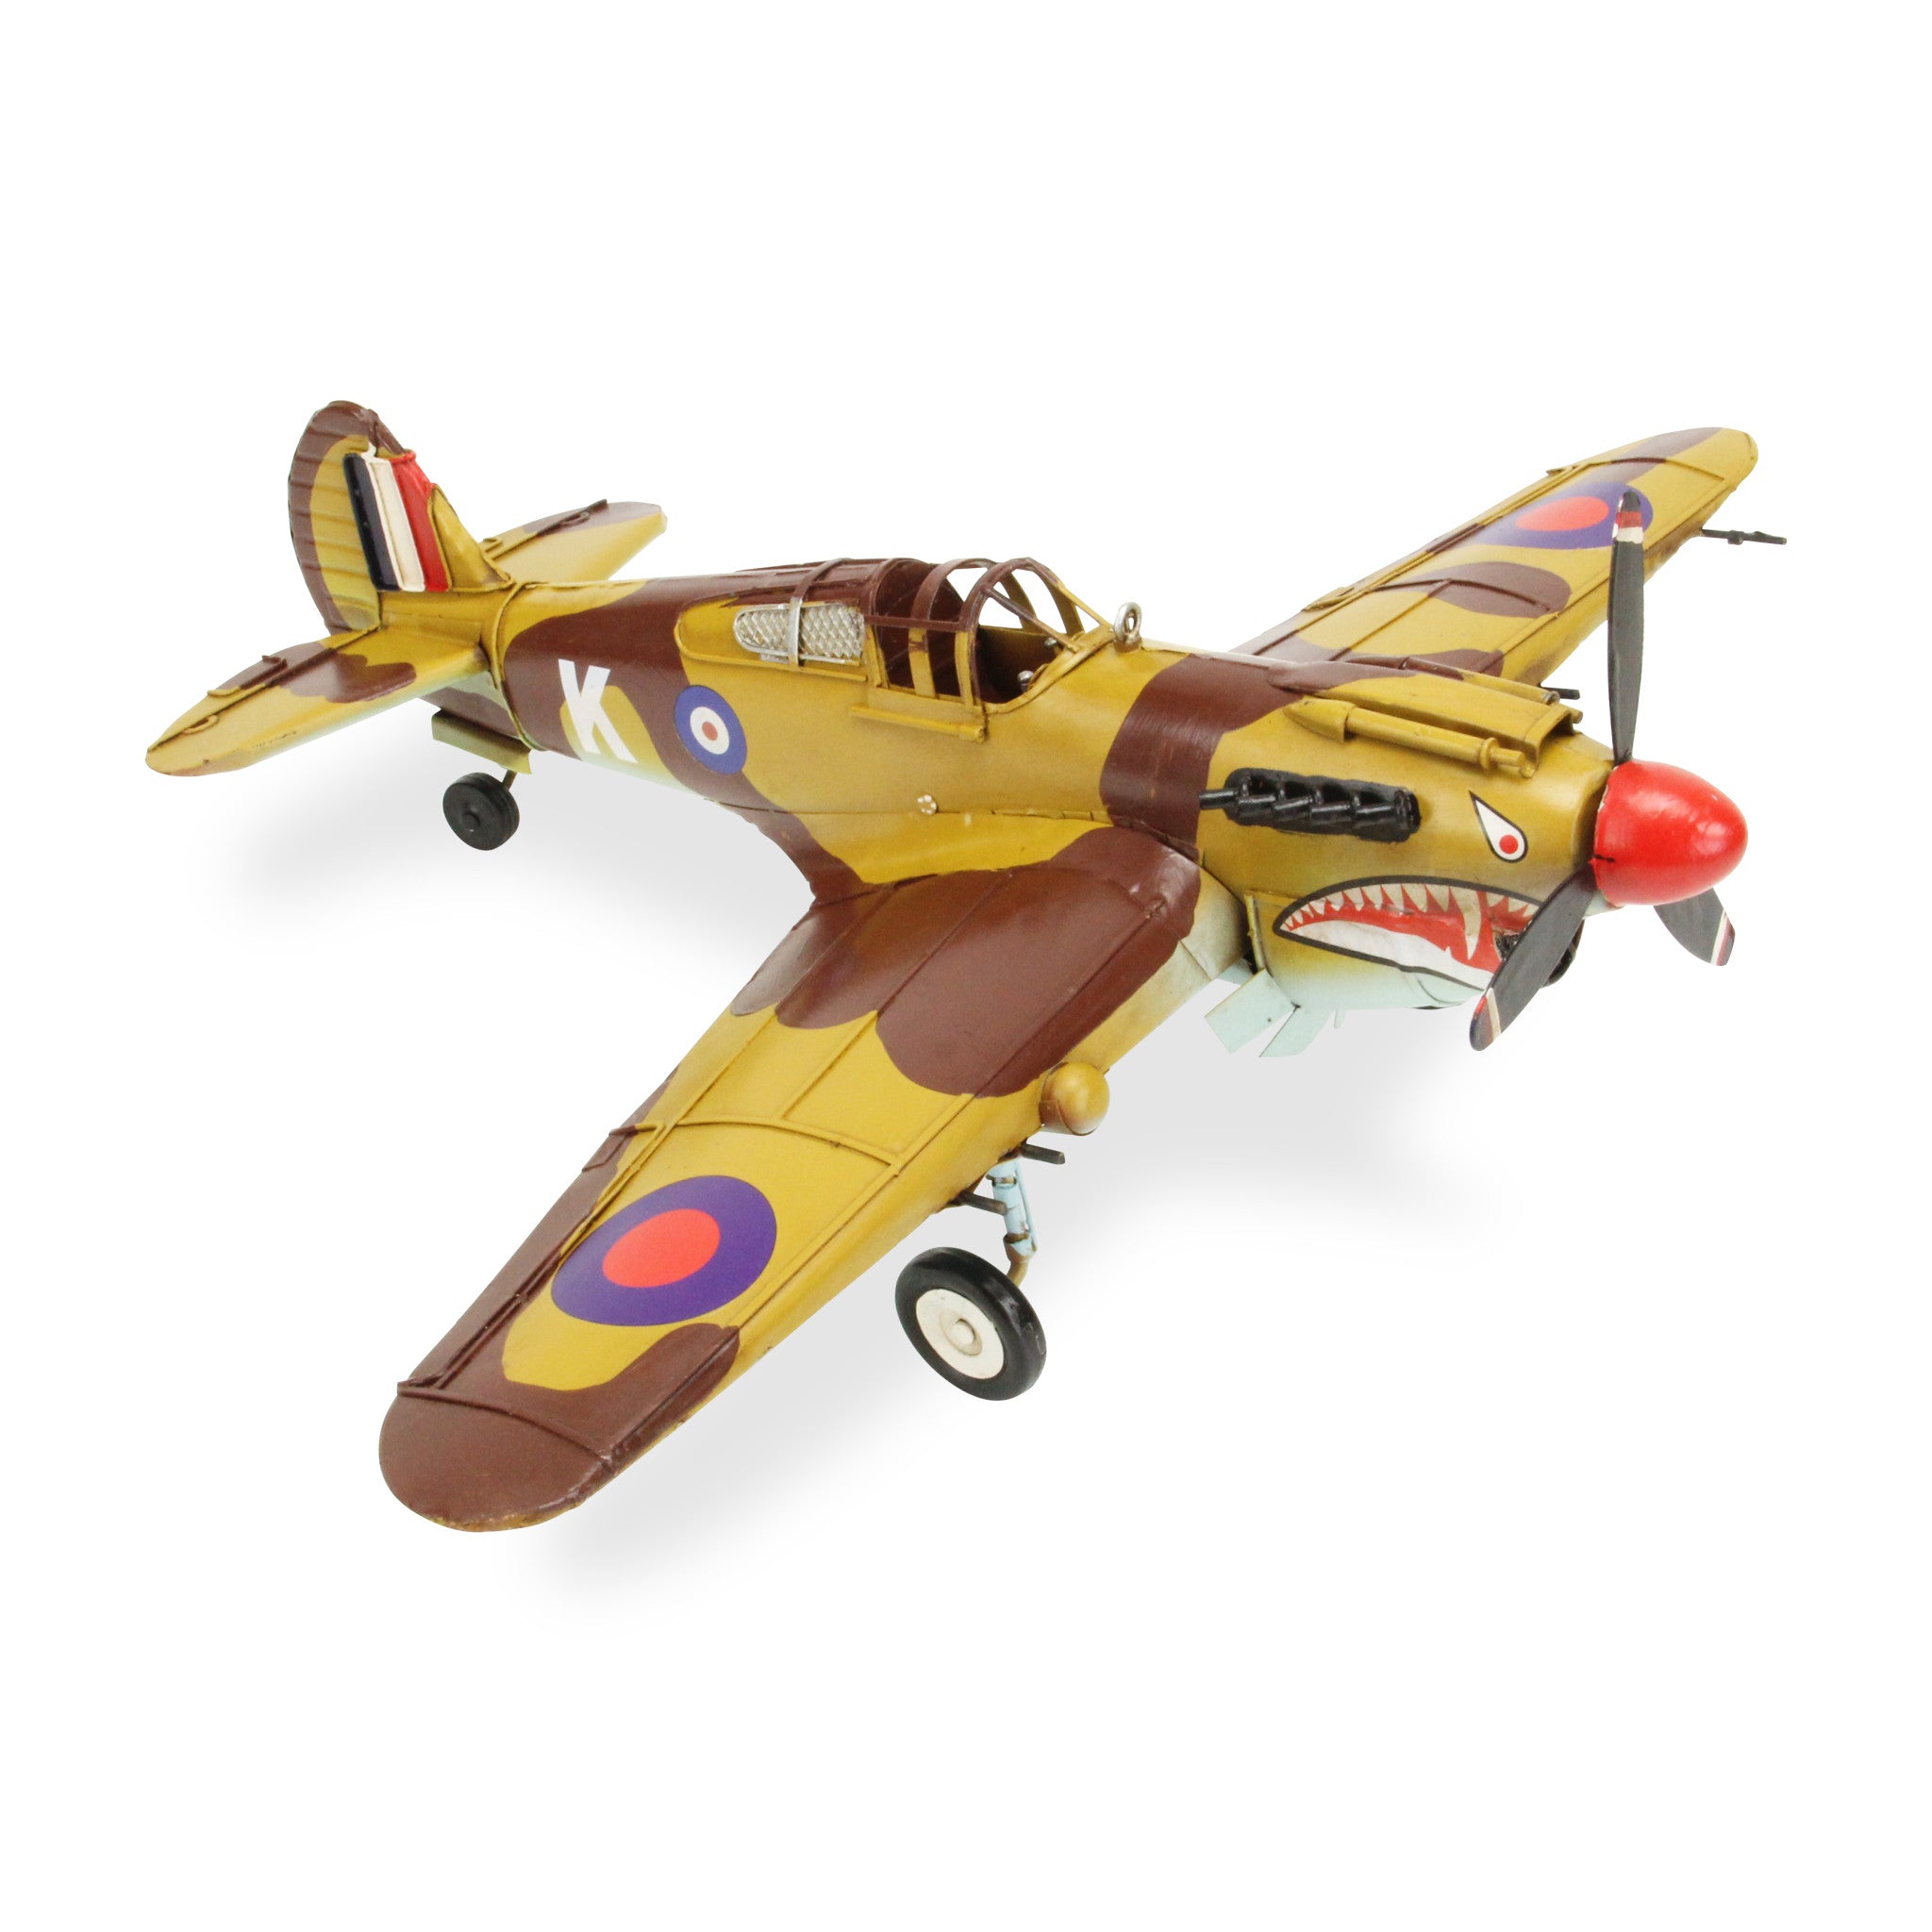 6" Yellow and Brown Metal Hand Painted Model Airplane